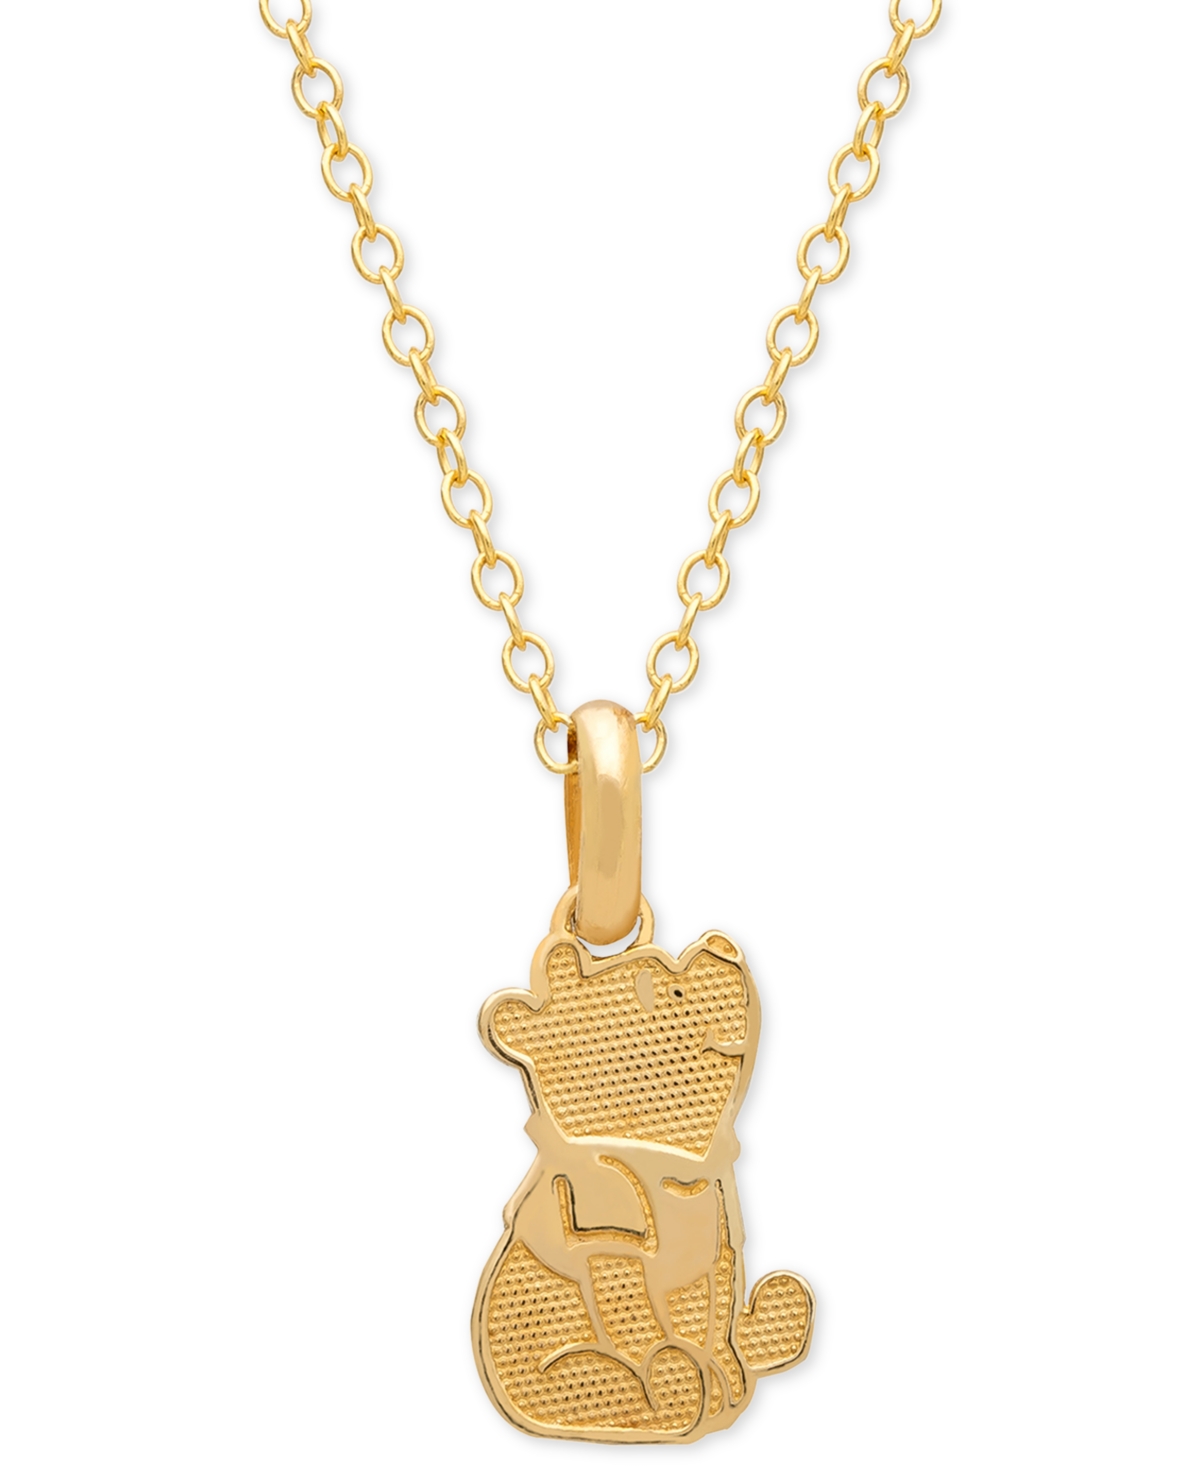 Children's Winnie the Pooh 15" Pendant Necklace in 14k Gold - Yellow Gold